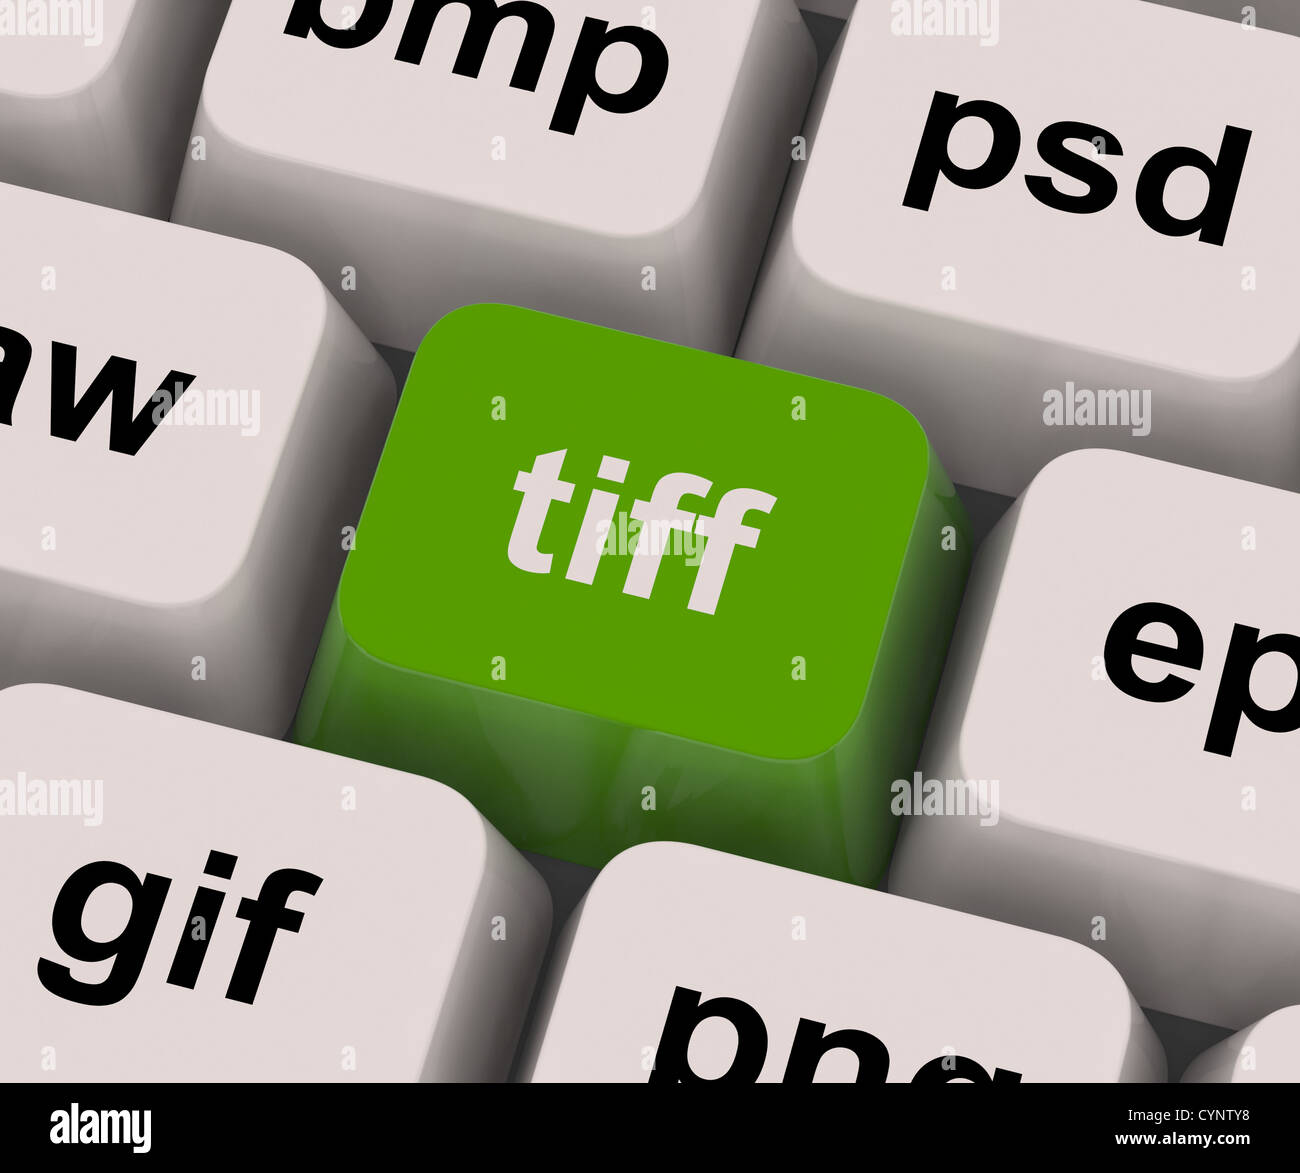 Tiff Key Showing Image Format For Tif Pictures Stock Photo